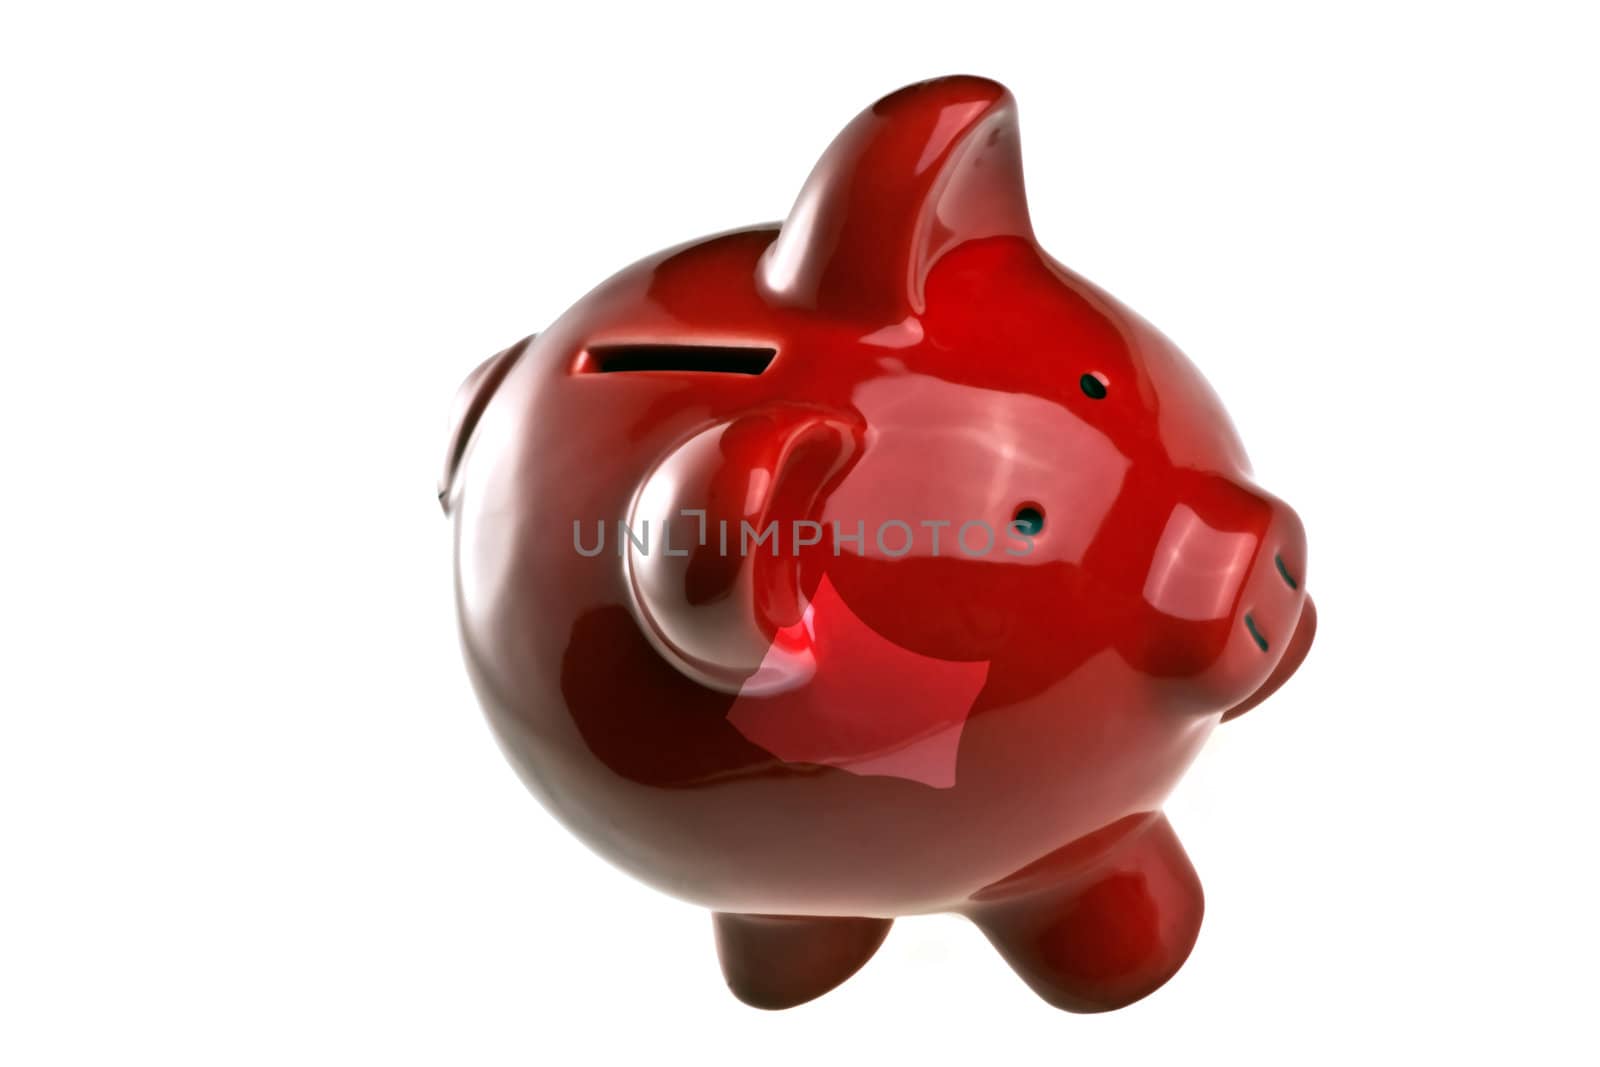 Pig, money, and savings by Marcus